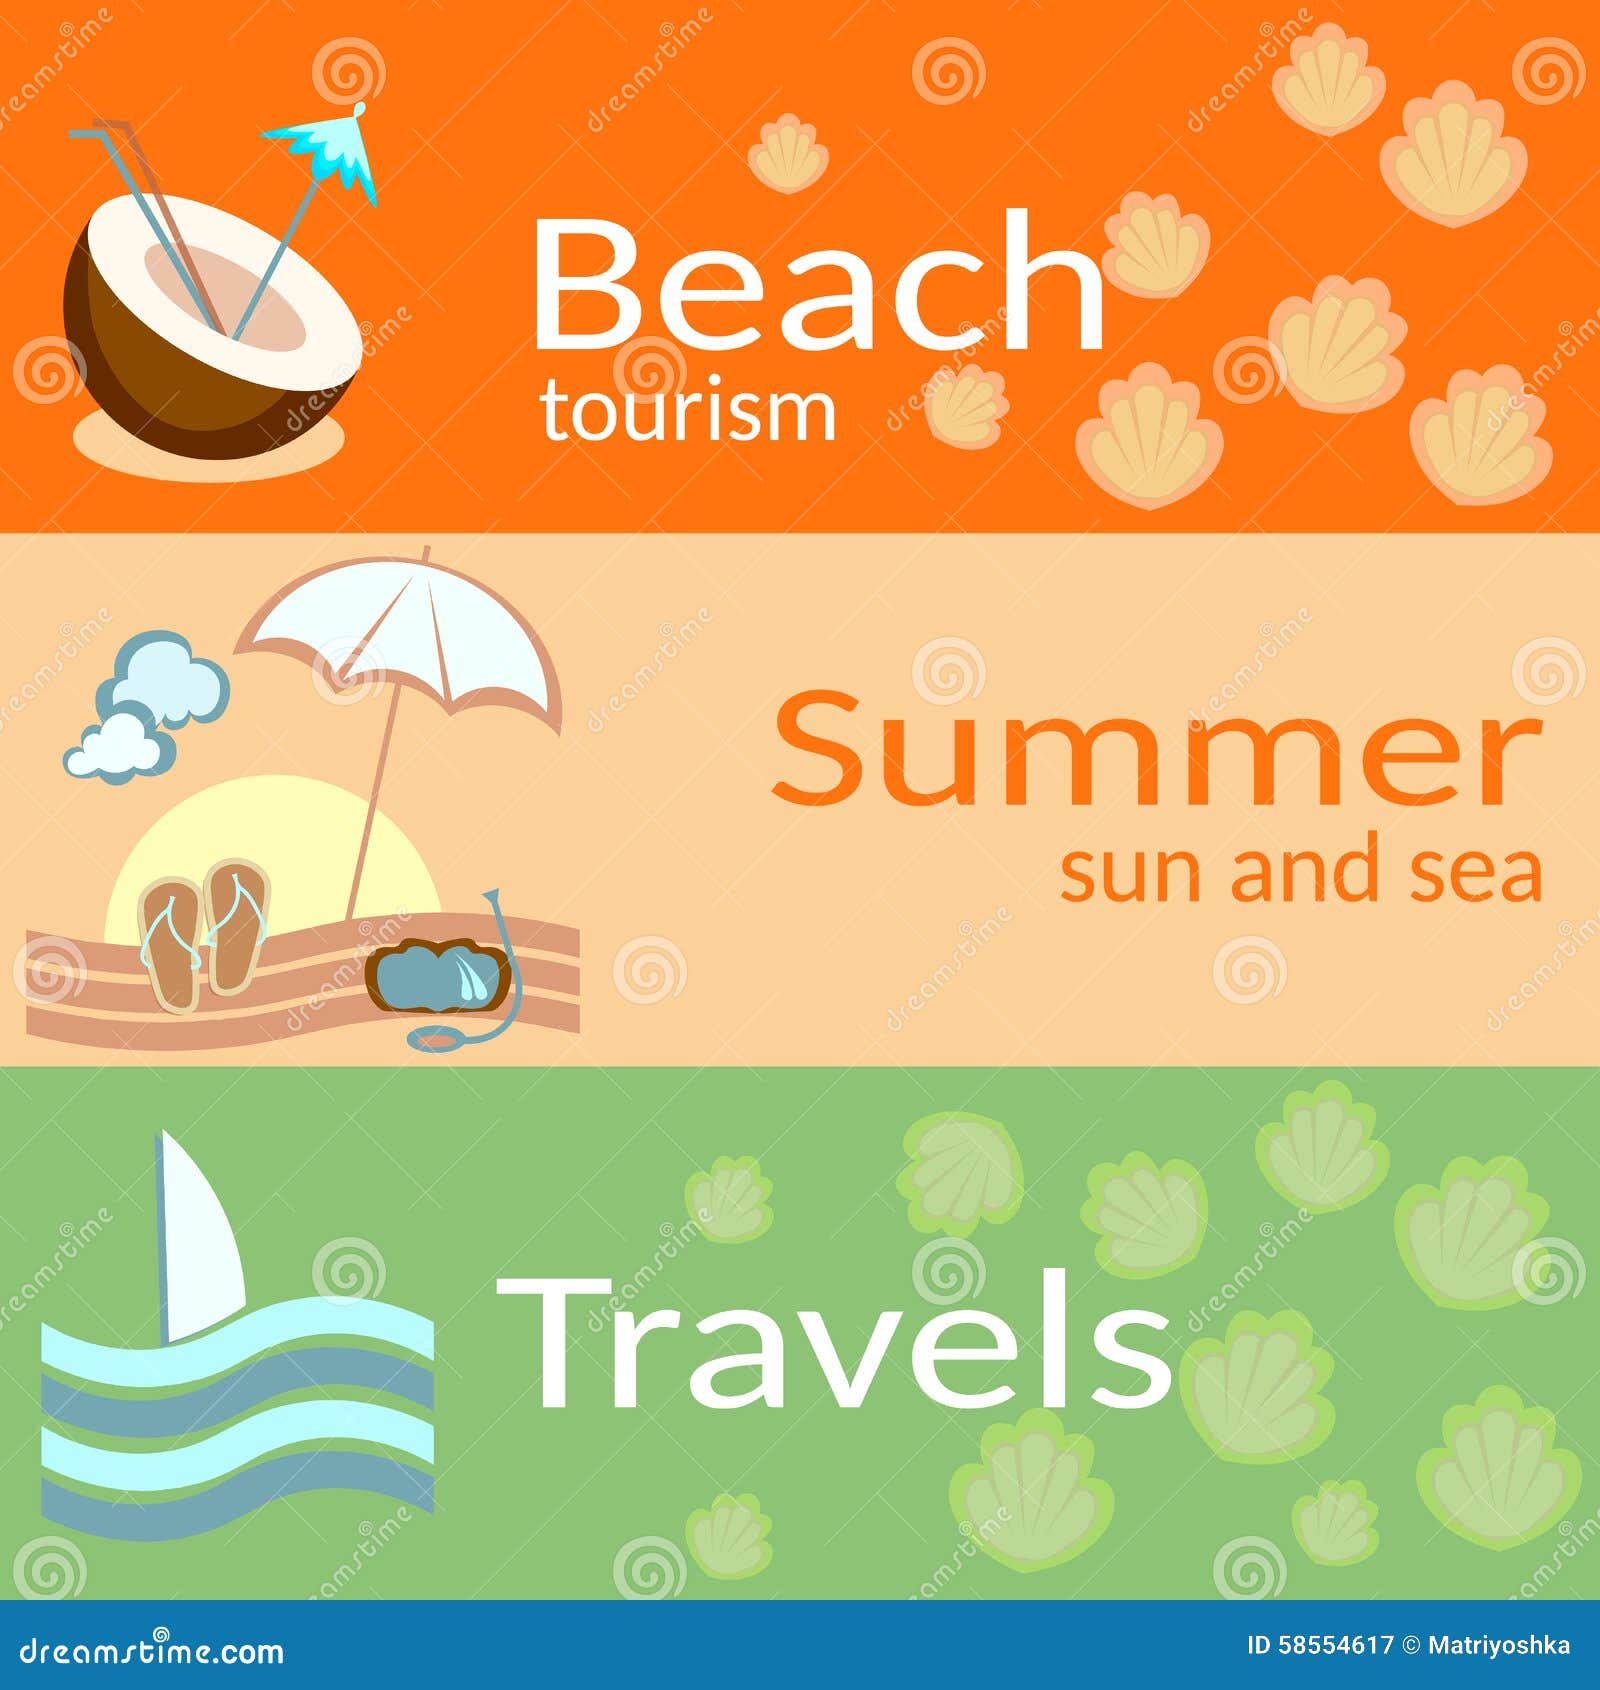 beach tourism, summer, sun and the sea, travels,  banners